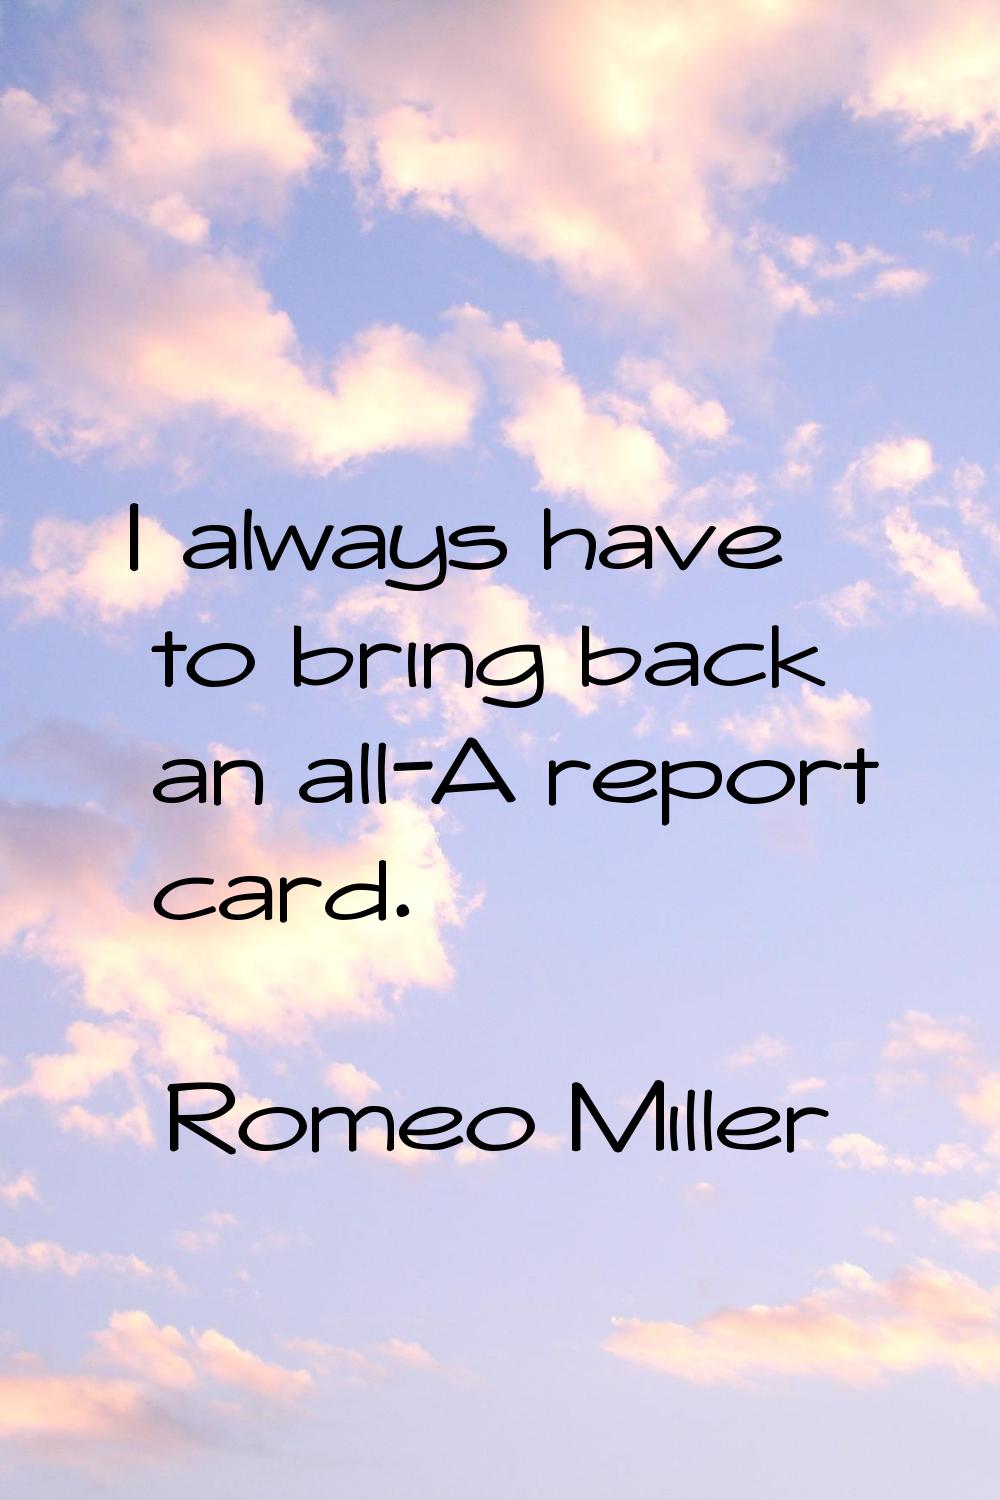 I always have to bring back an all-A report card.